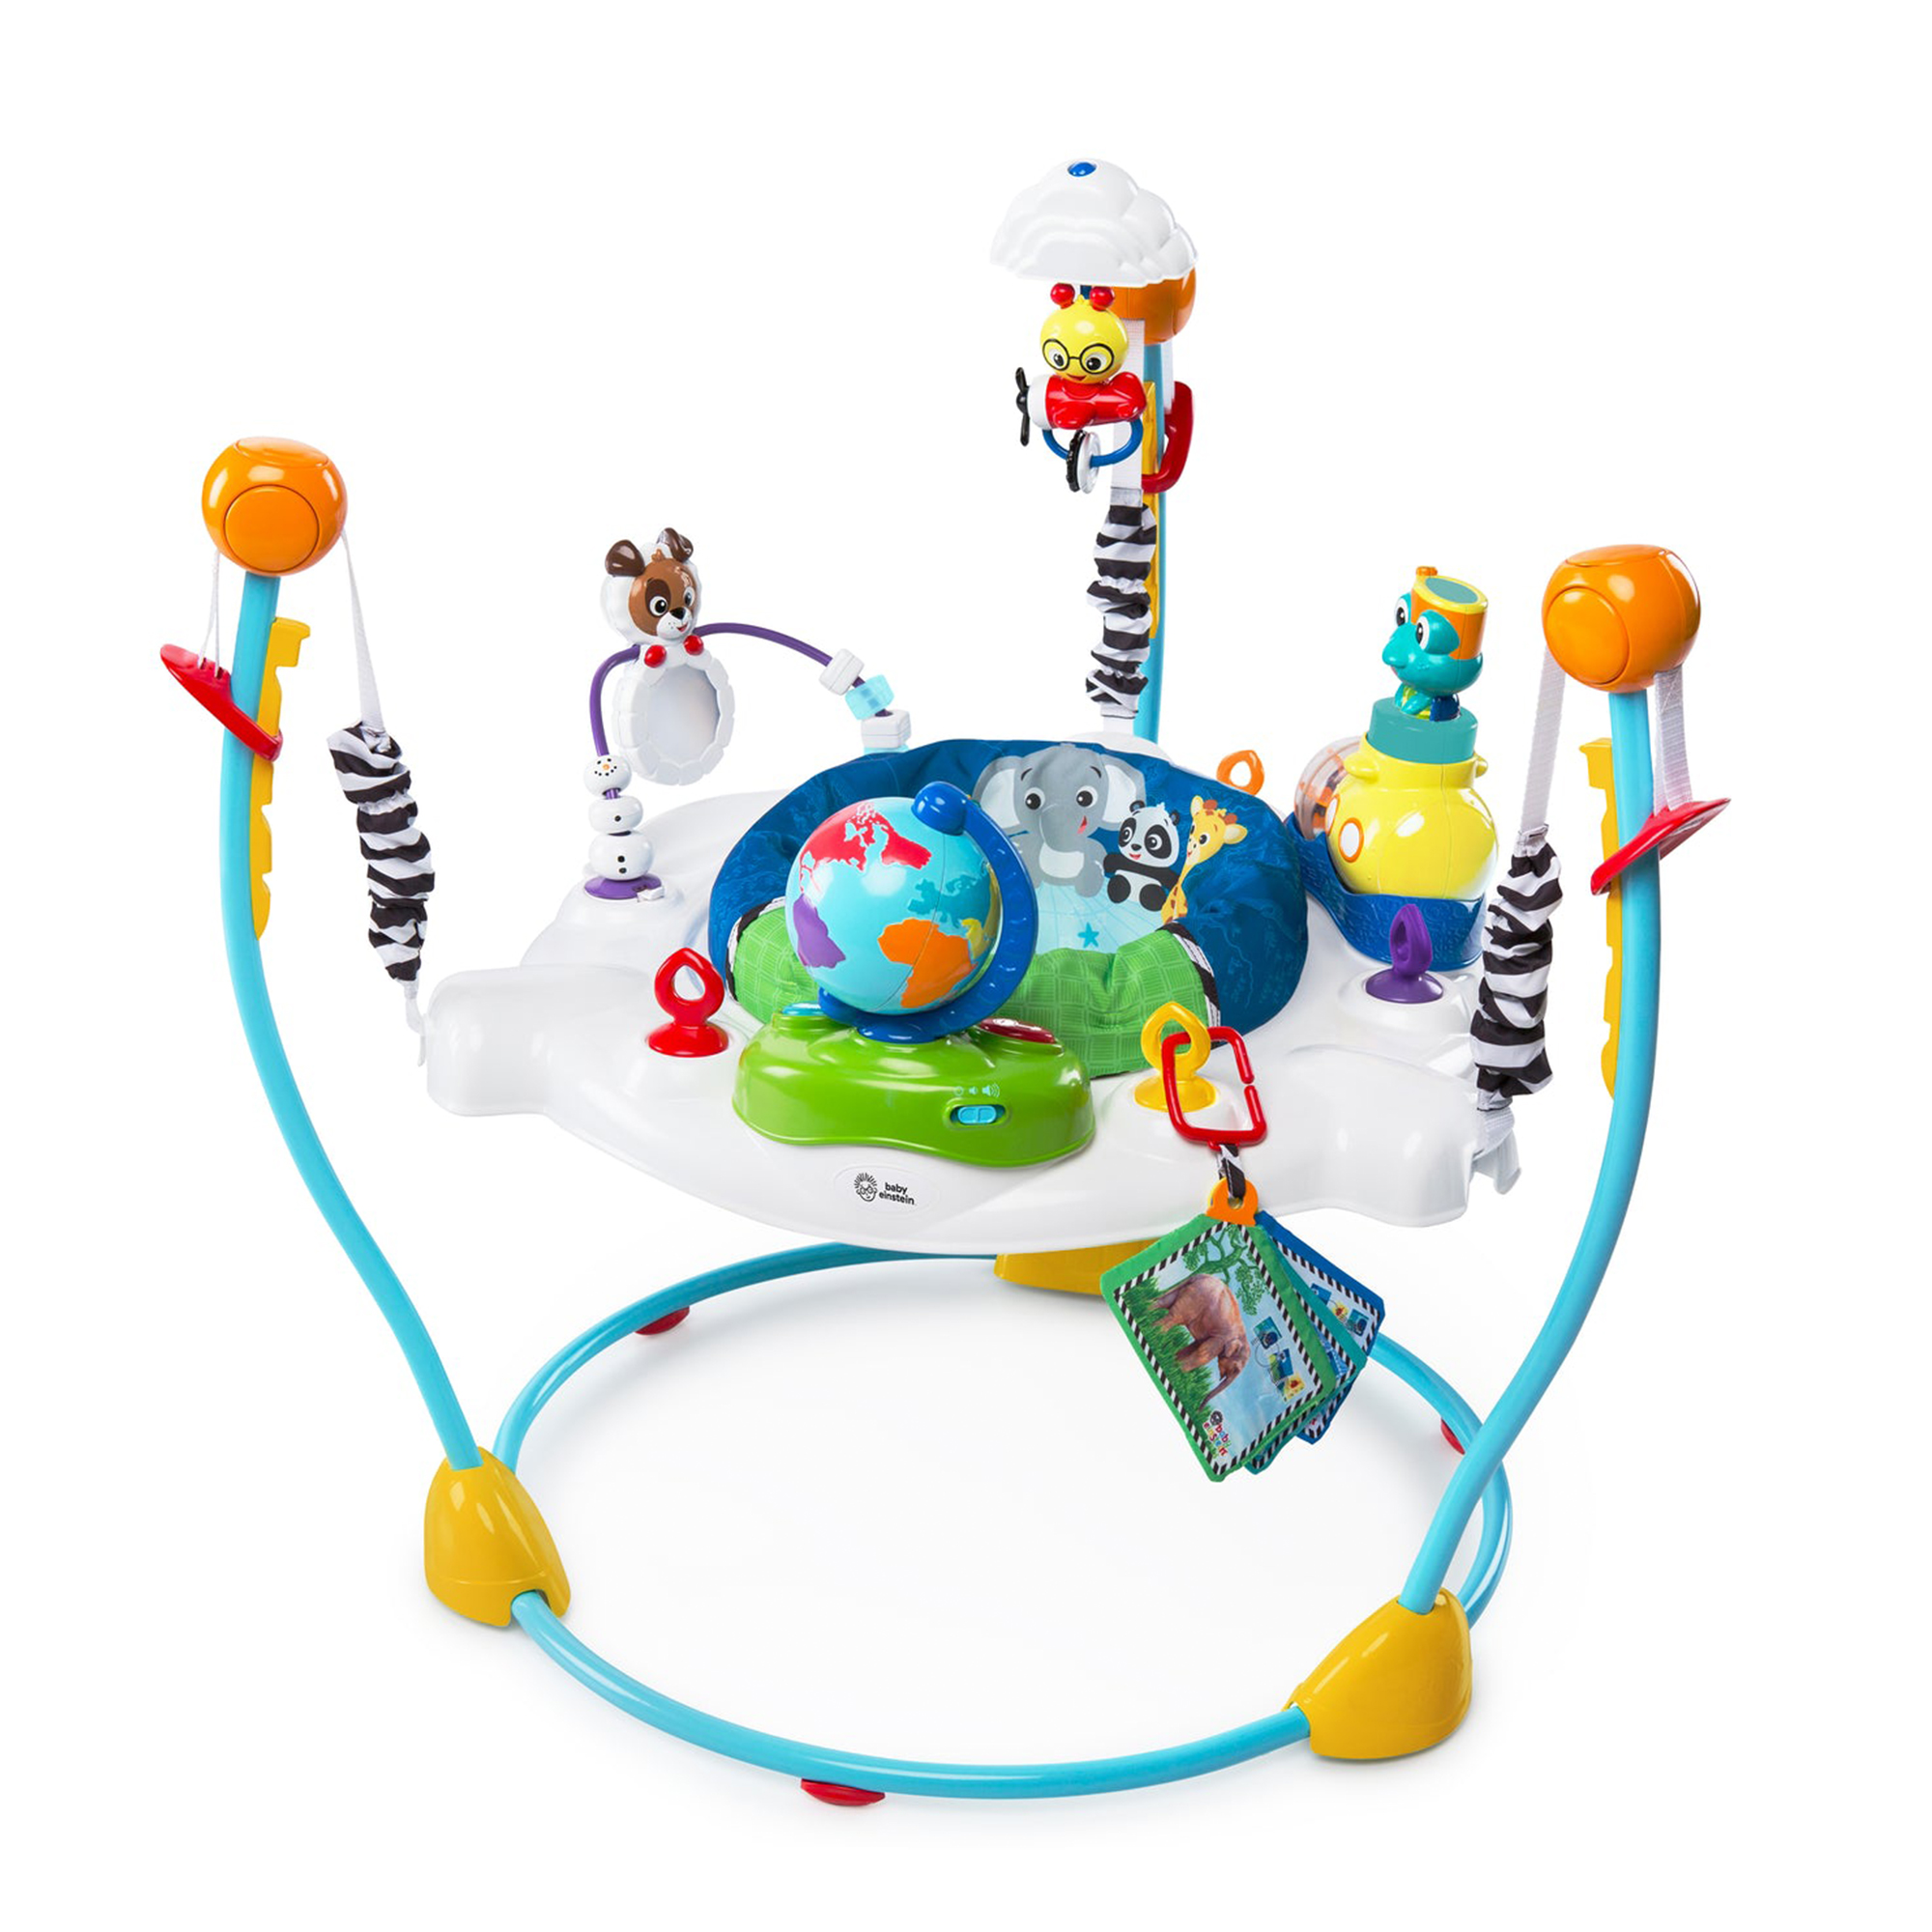 Baby Einstein Journey of Discovery Jumper Activity Center with Lights and Sounds - image 1 of 12